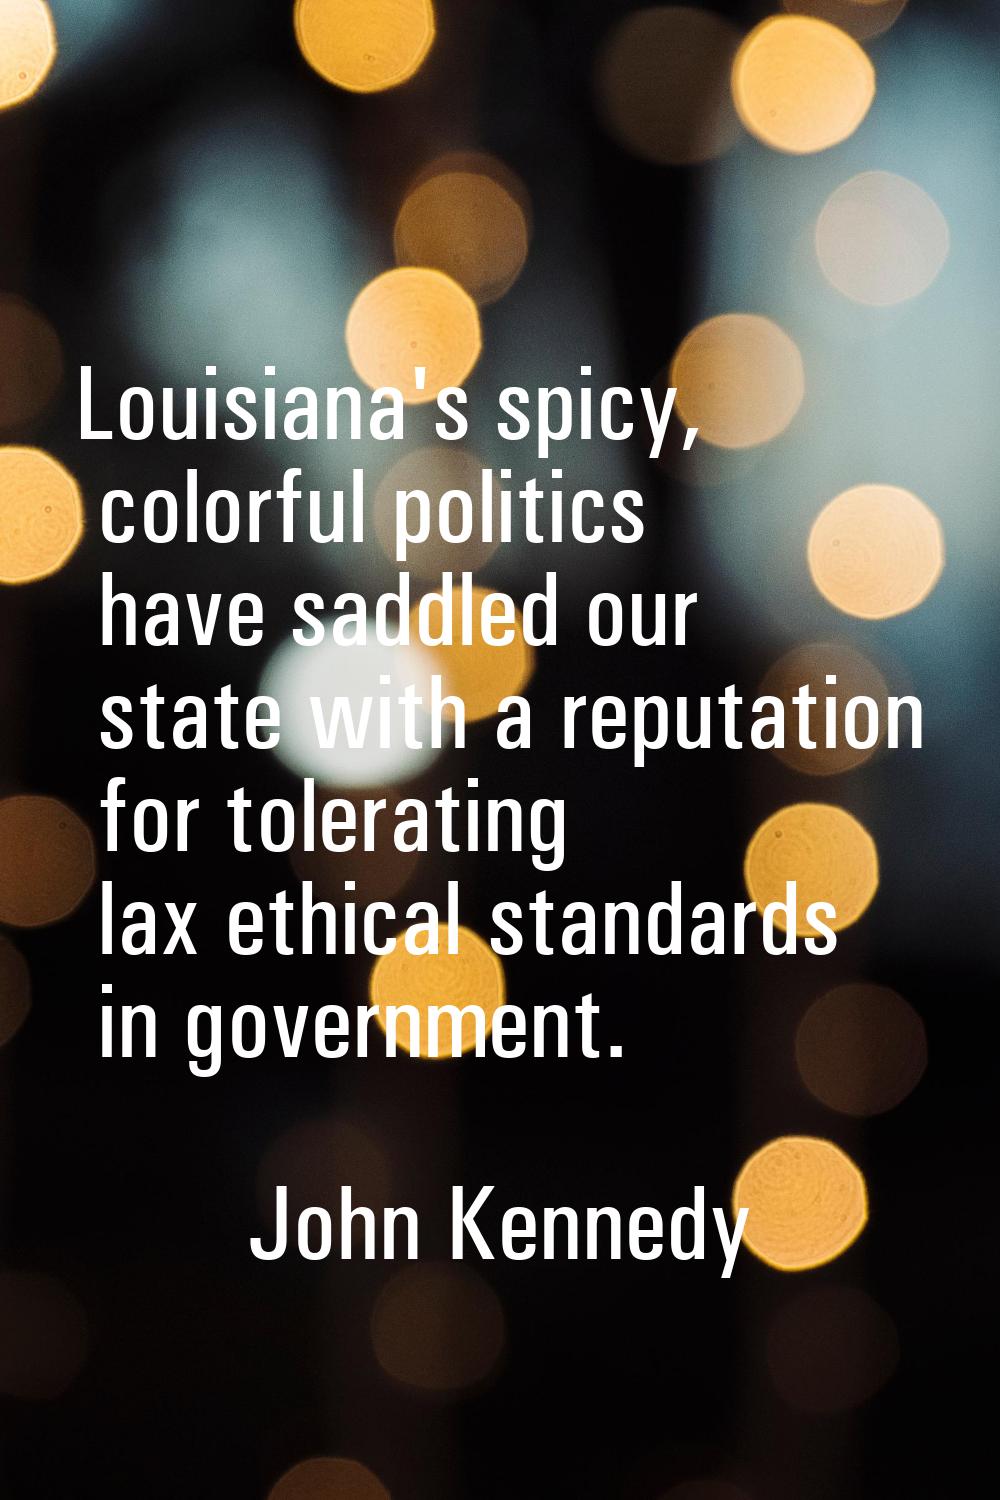 Louisiana's spicy, colorful politics have saddled our state with a reputation for tolerating lax et